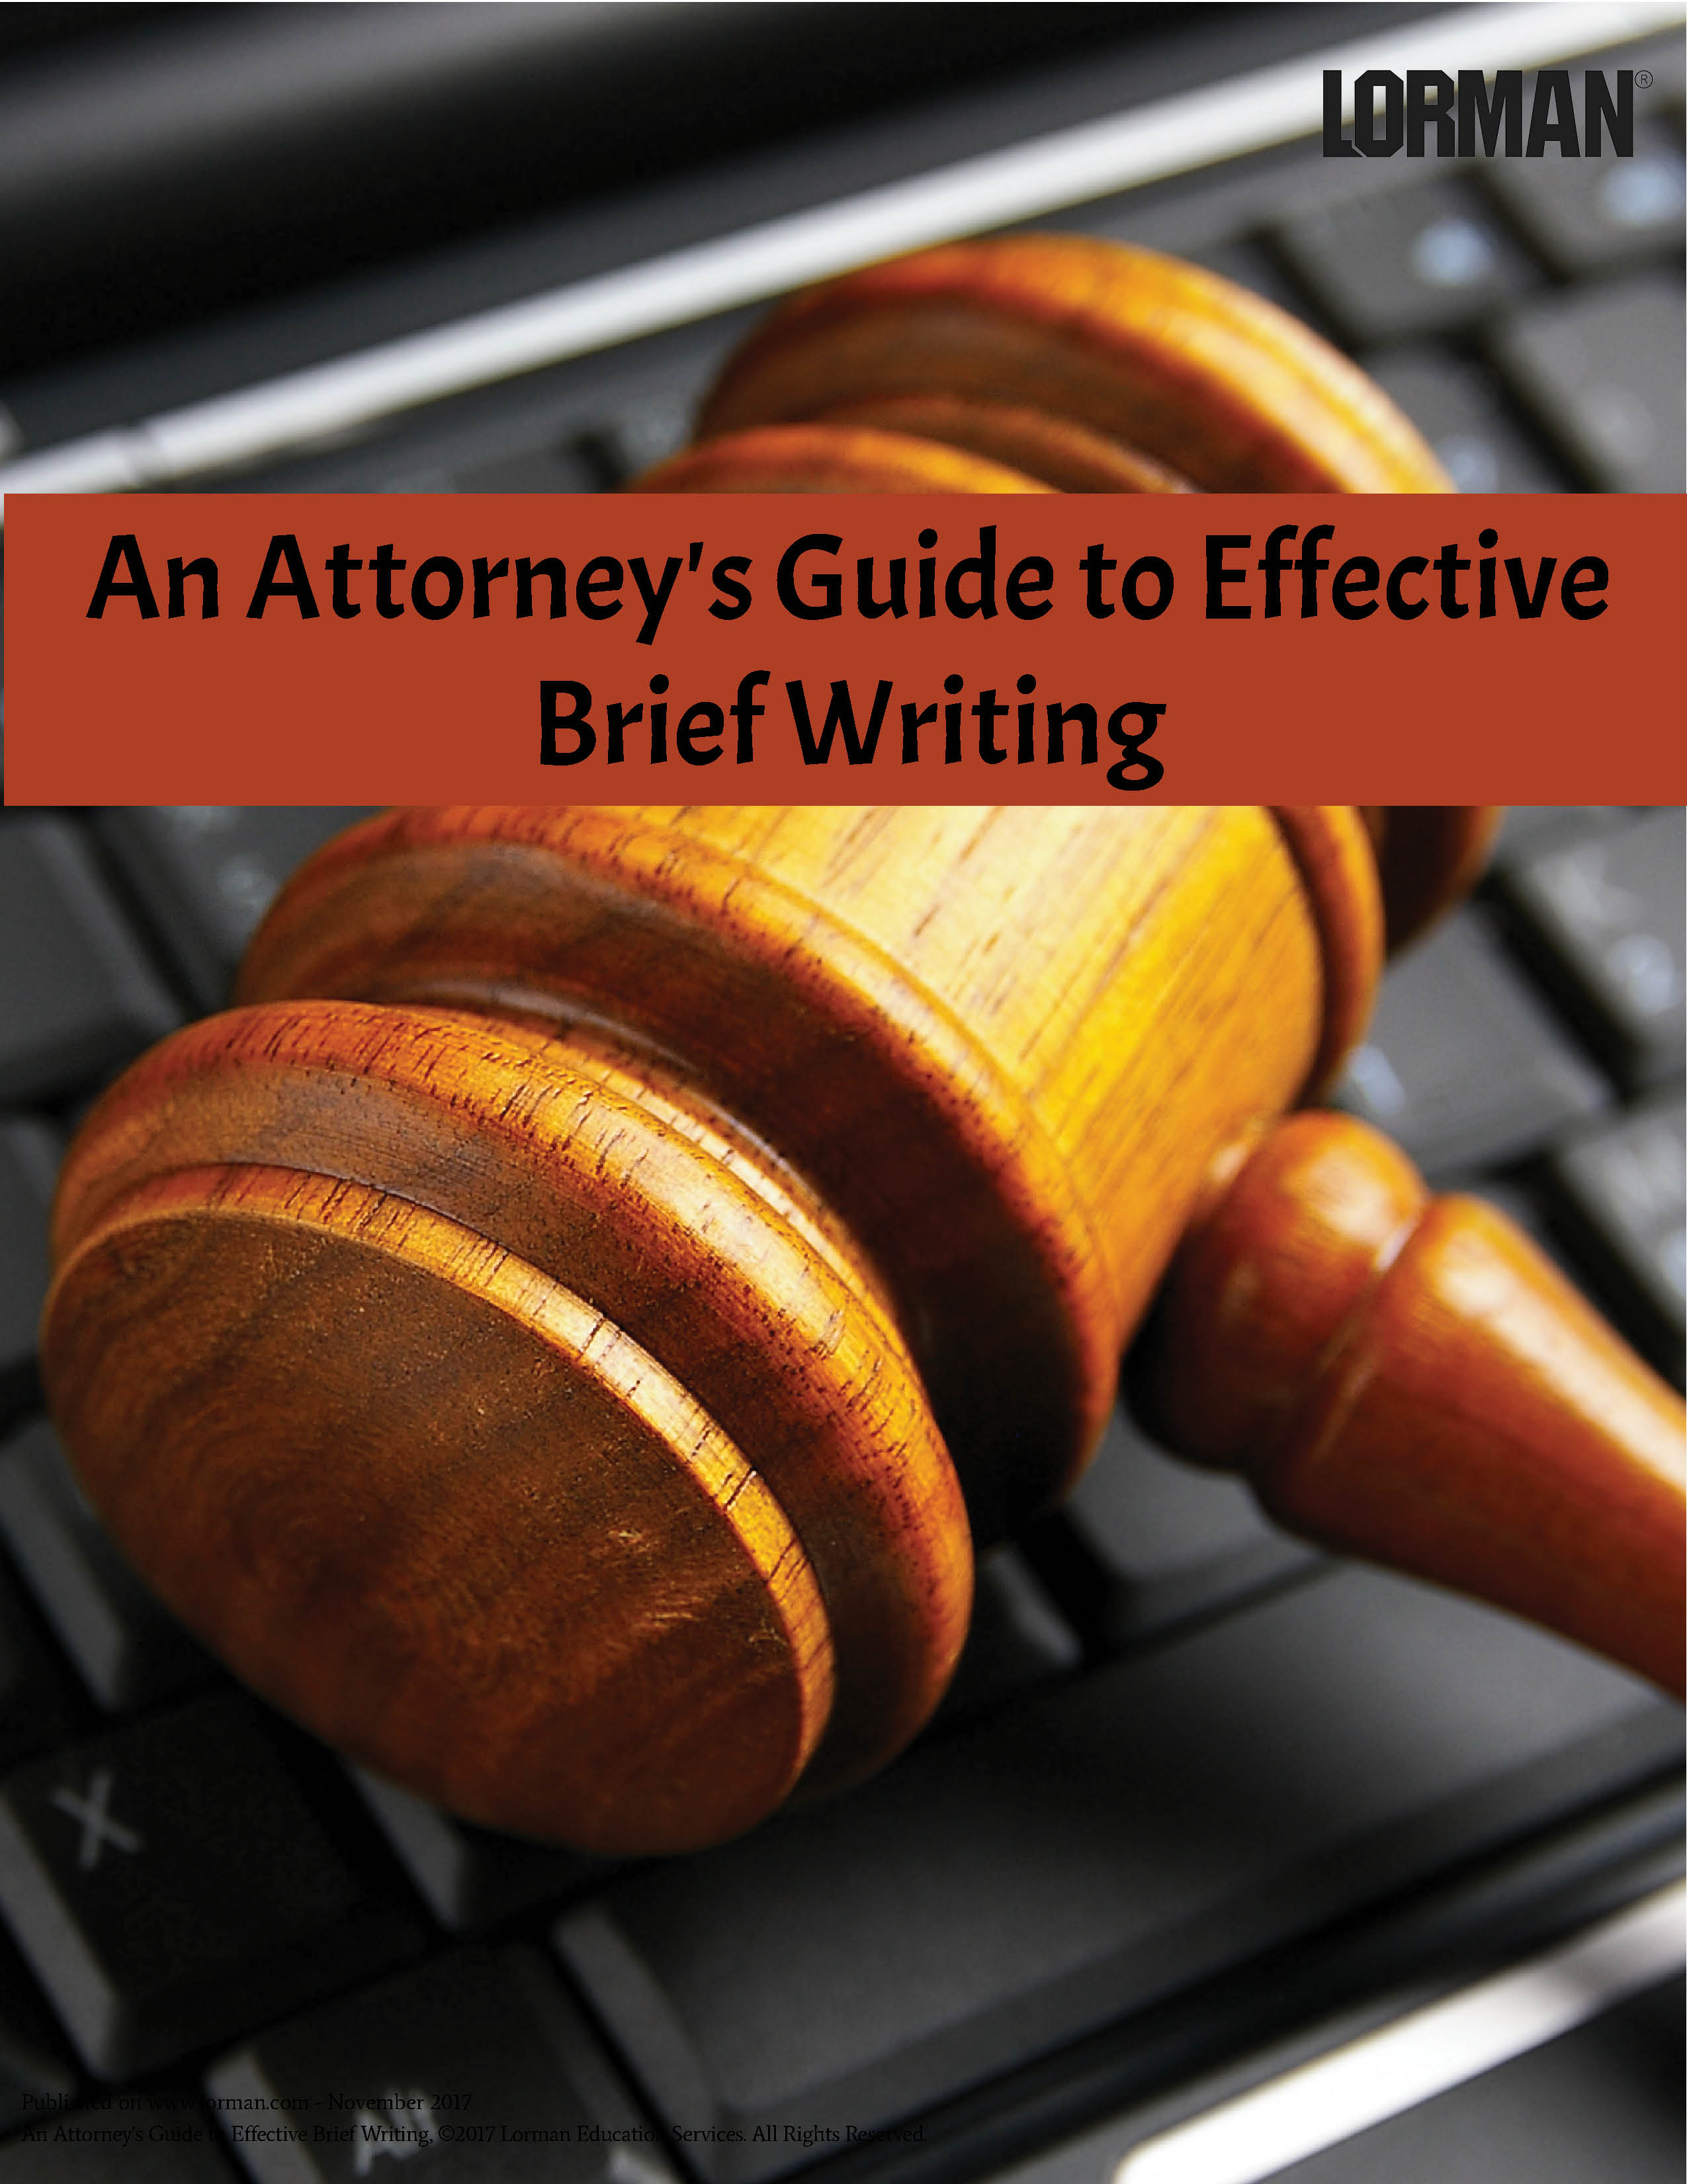 An Attorney's Guide to Effective Brief Writing